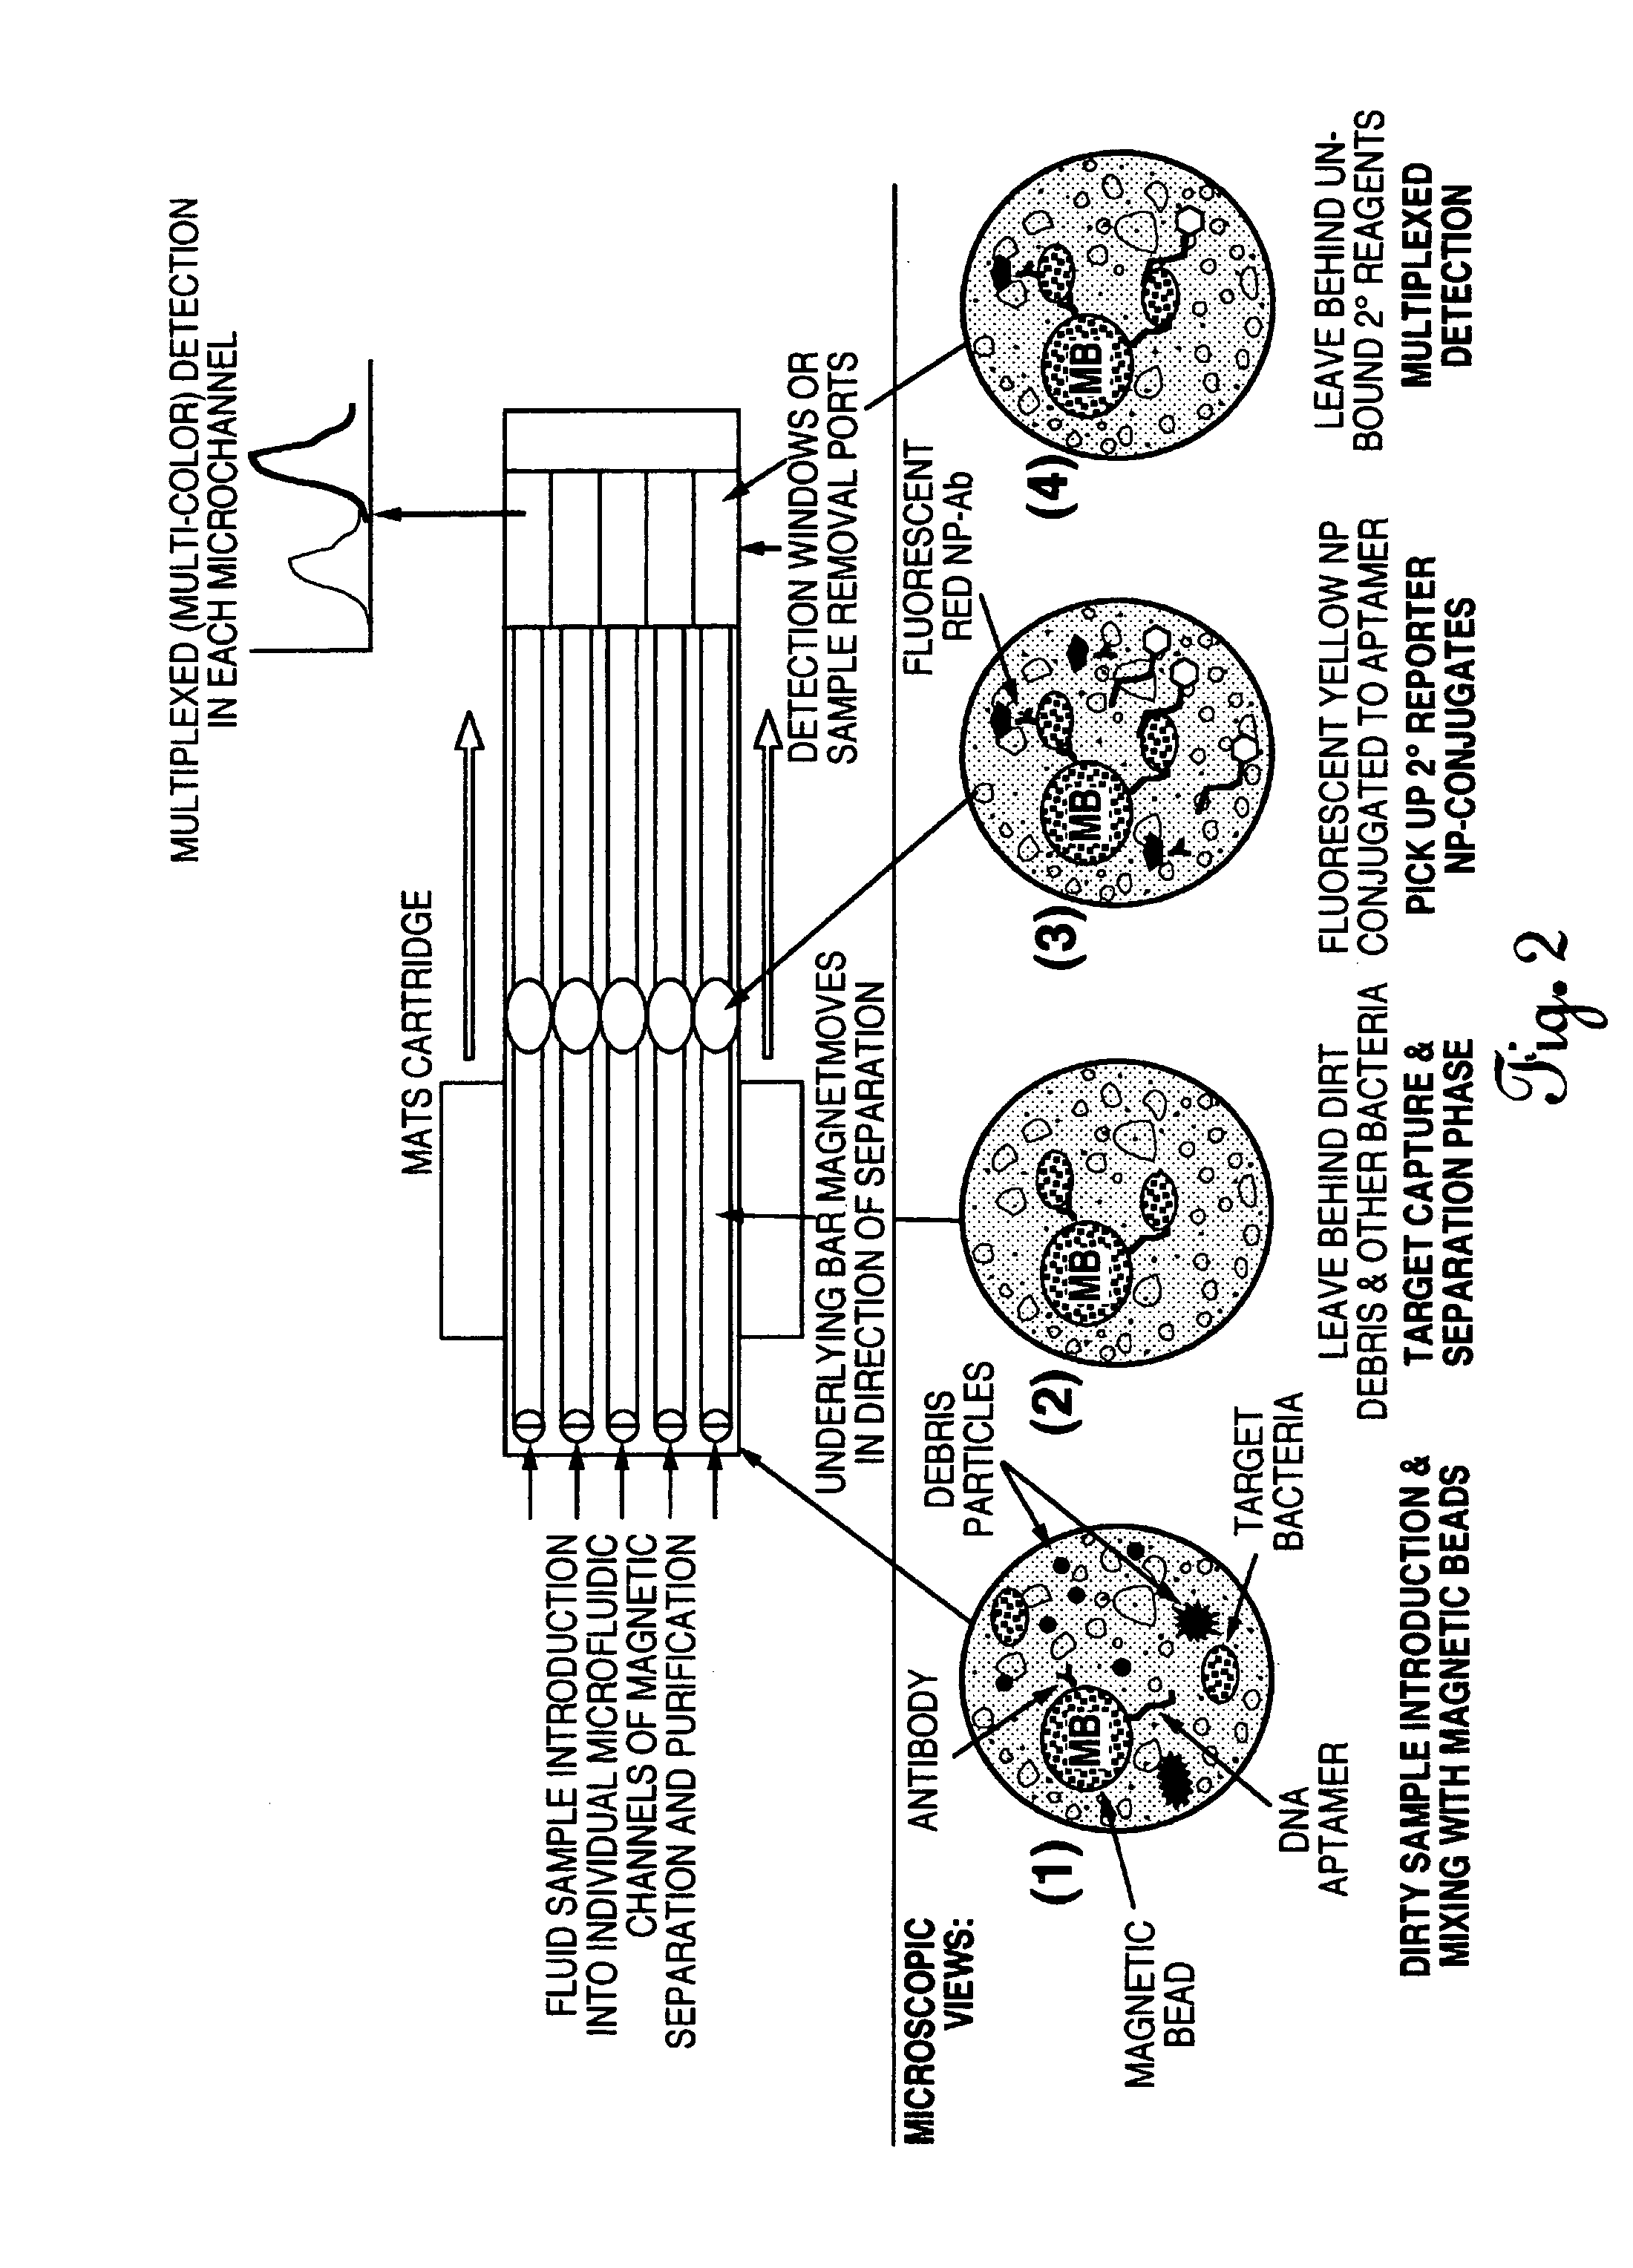 Magnetically-assisted test strip cartridge and method for using same